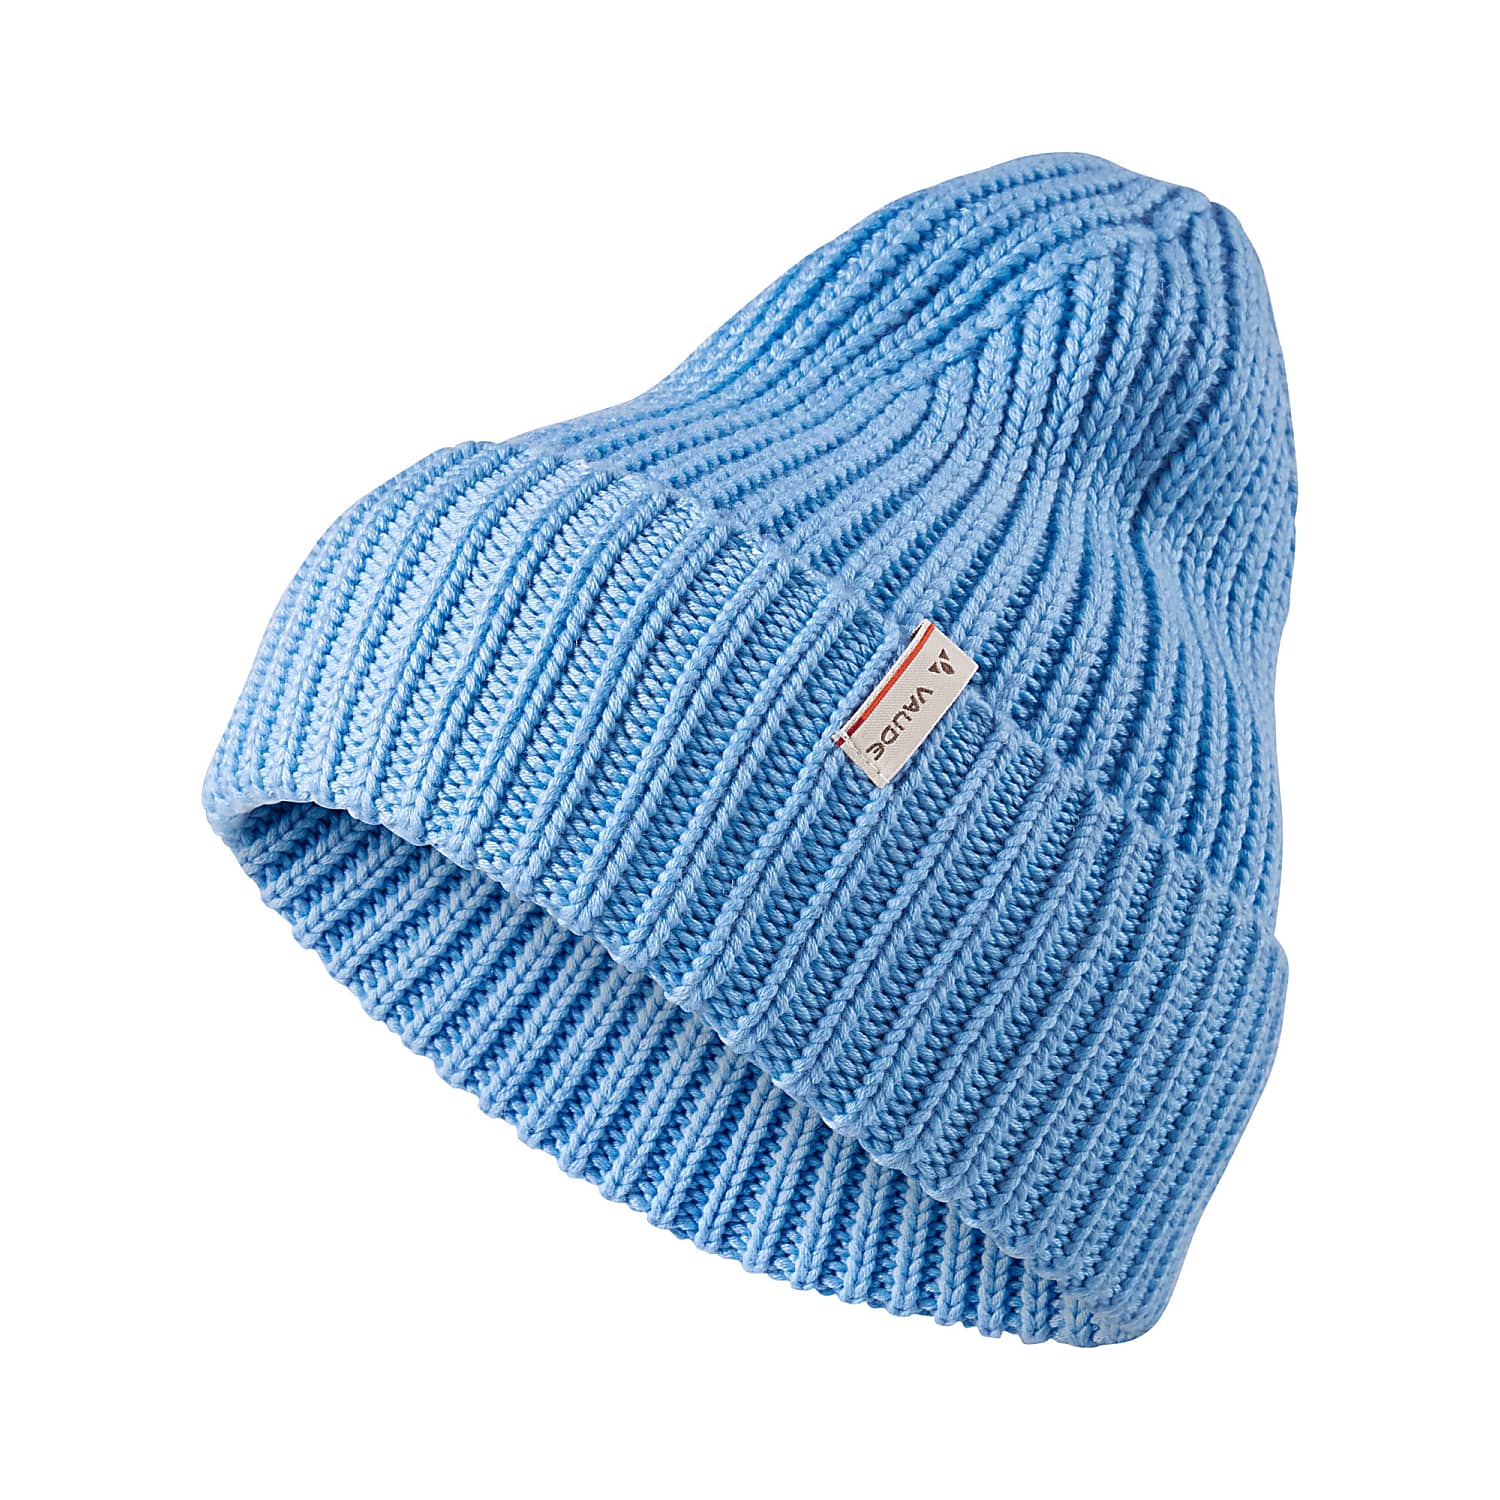 Vaude cheap Fast shipping Blue - MOENA II, and BEANIE Pastel